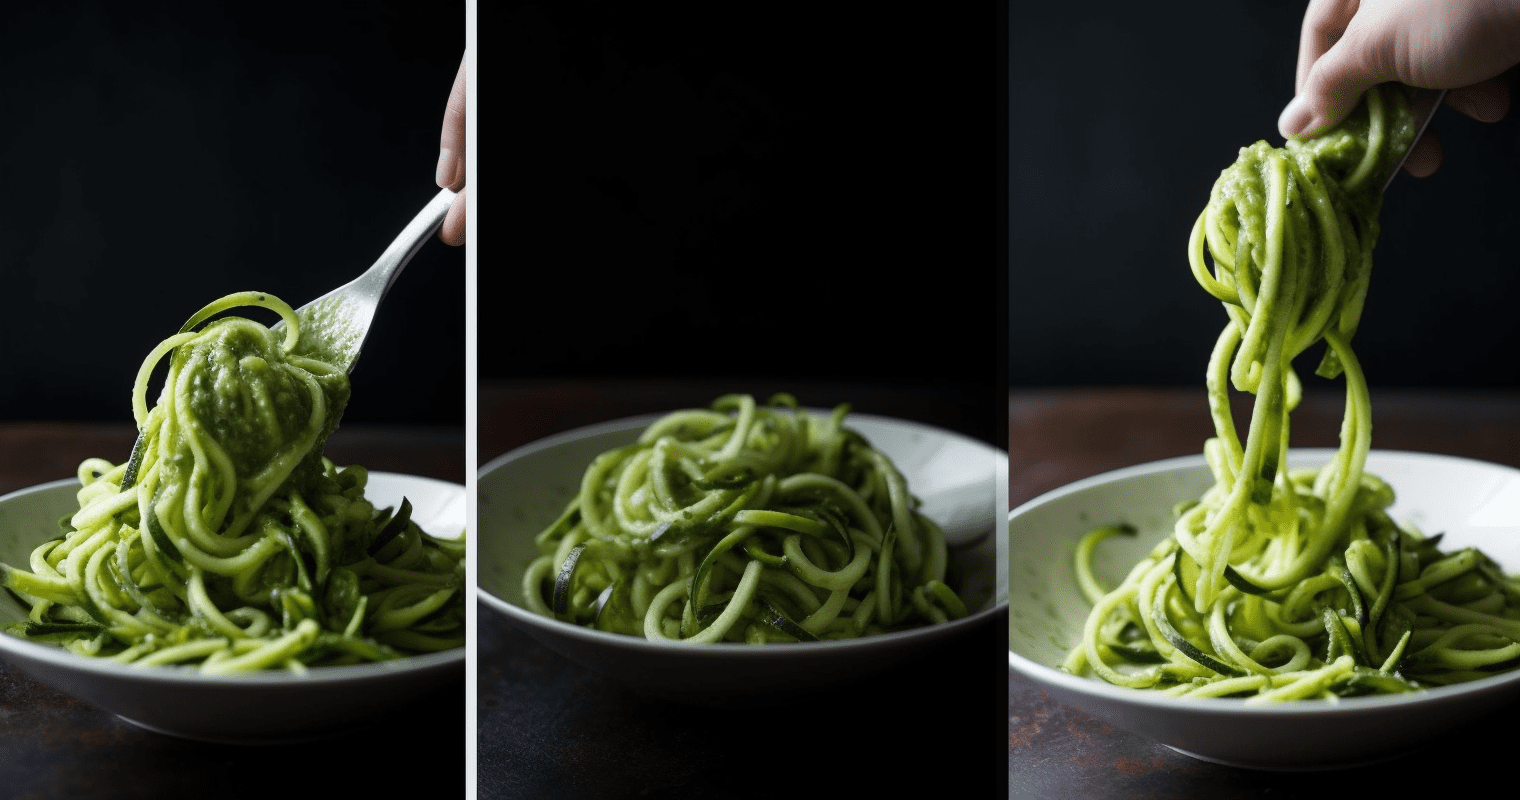 Transforming Ordinary Vegetables: Zucchini Noodles with Pesto Sauce